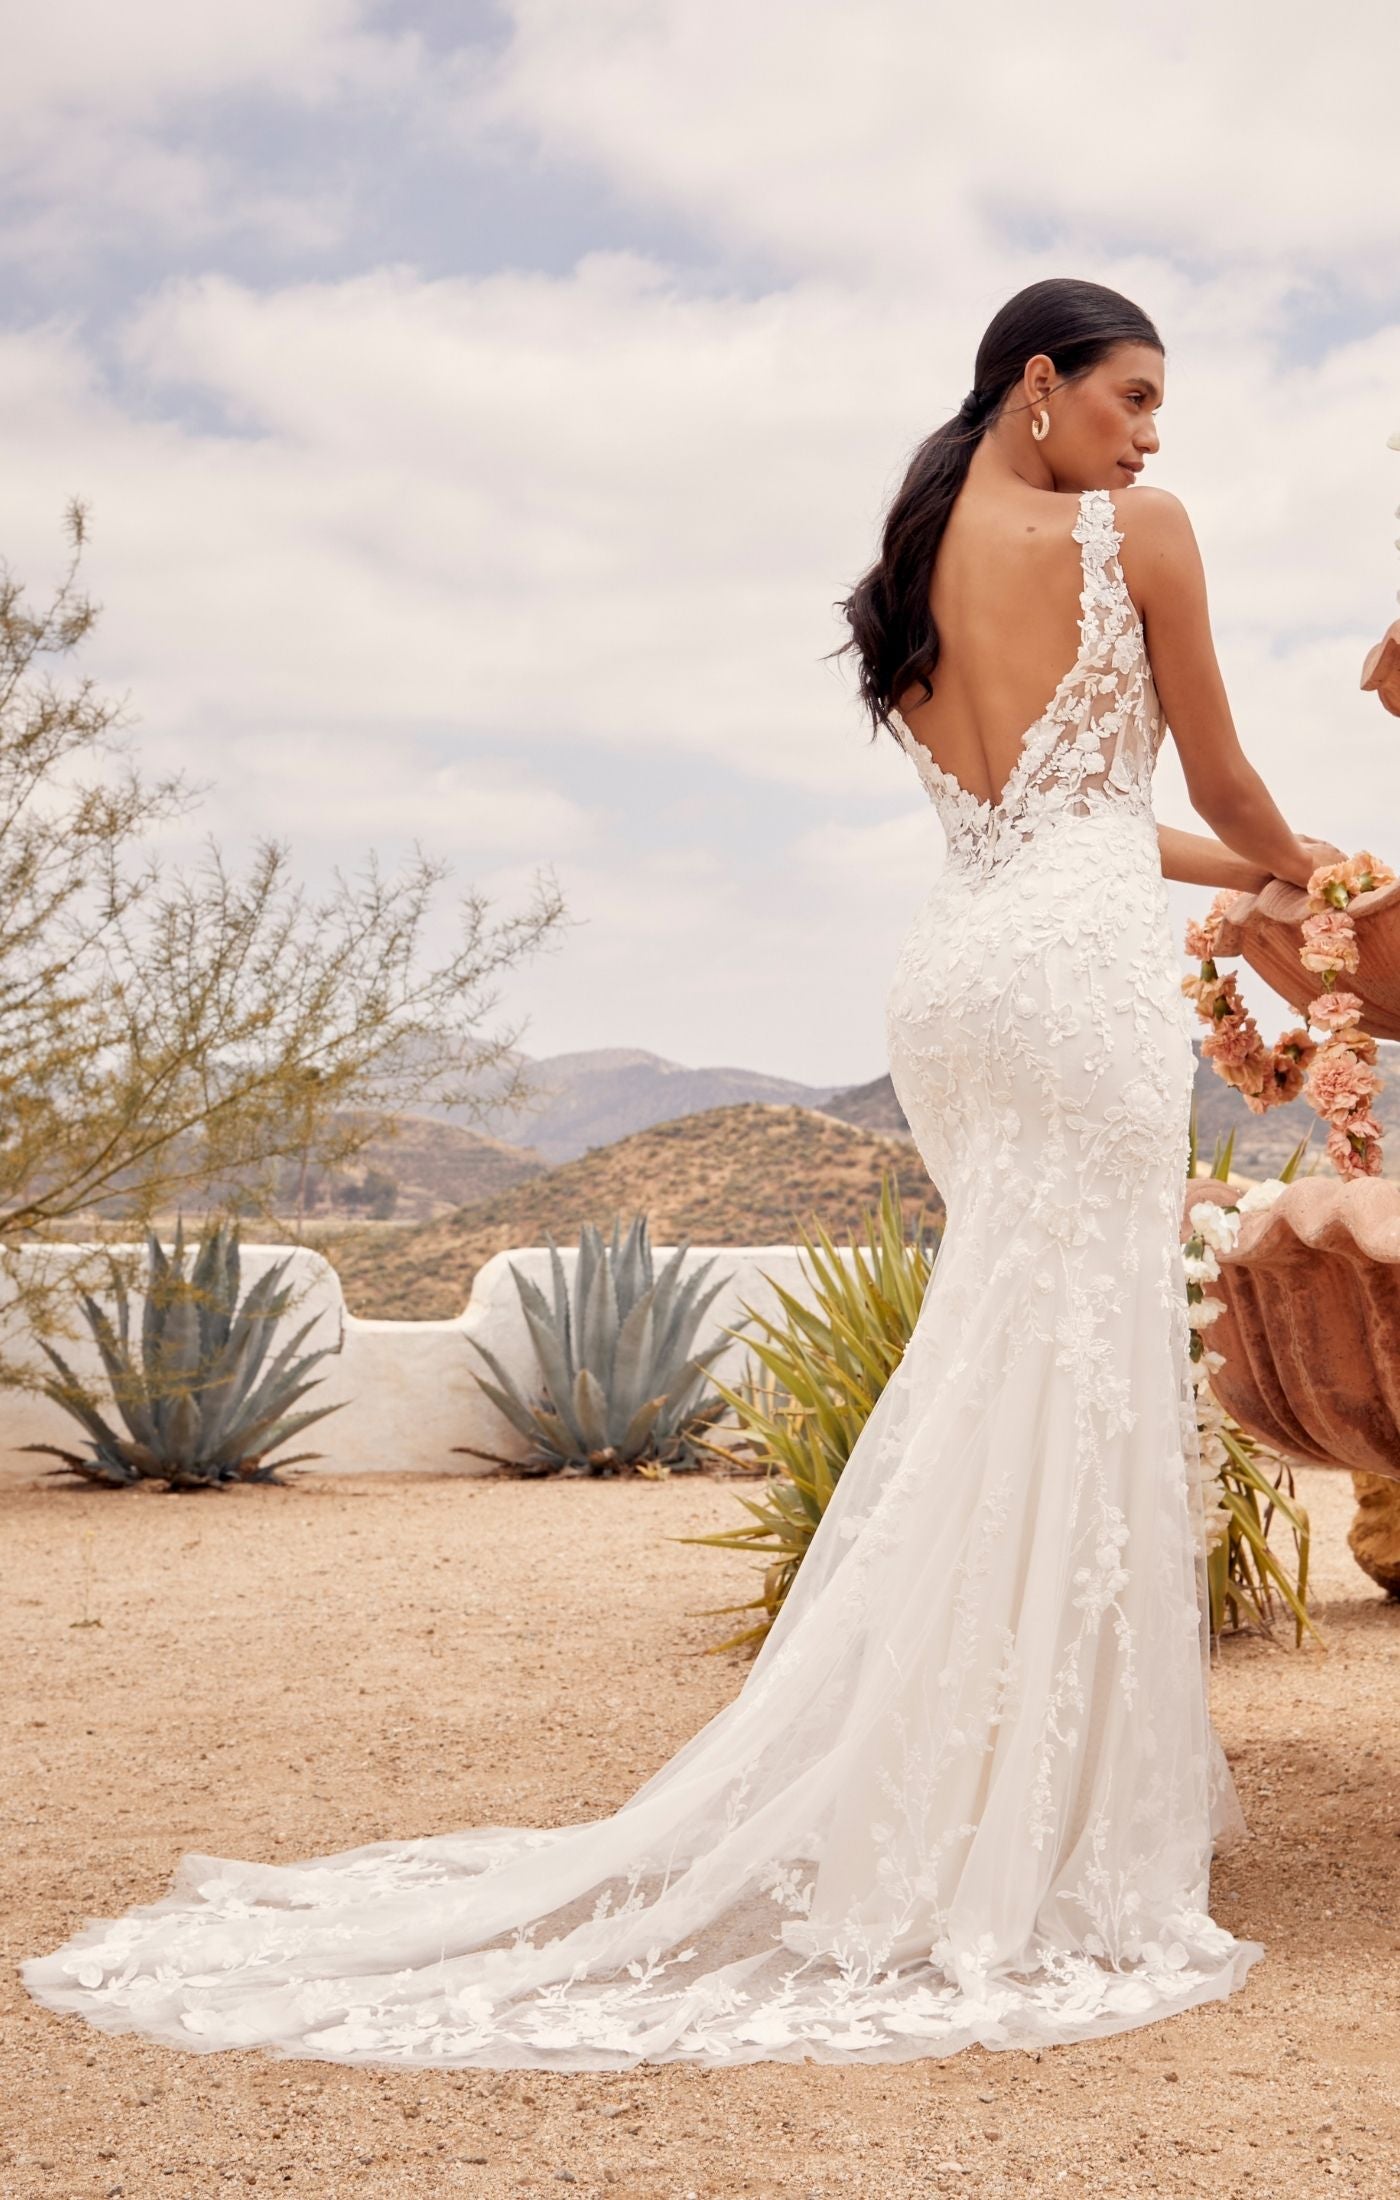 Plus Size Wedding Dress: Bridal Bodysuit With Open Back and Long